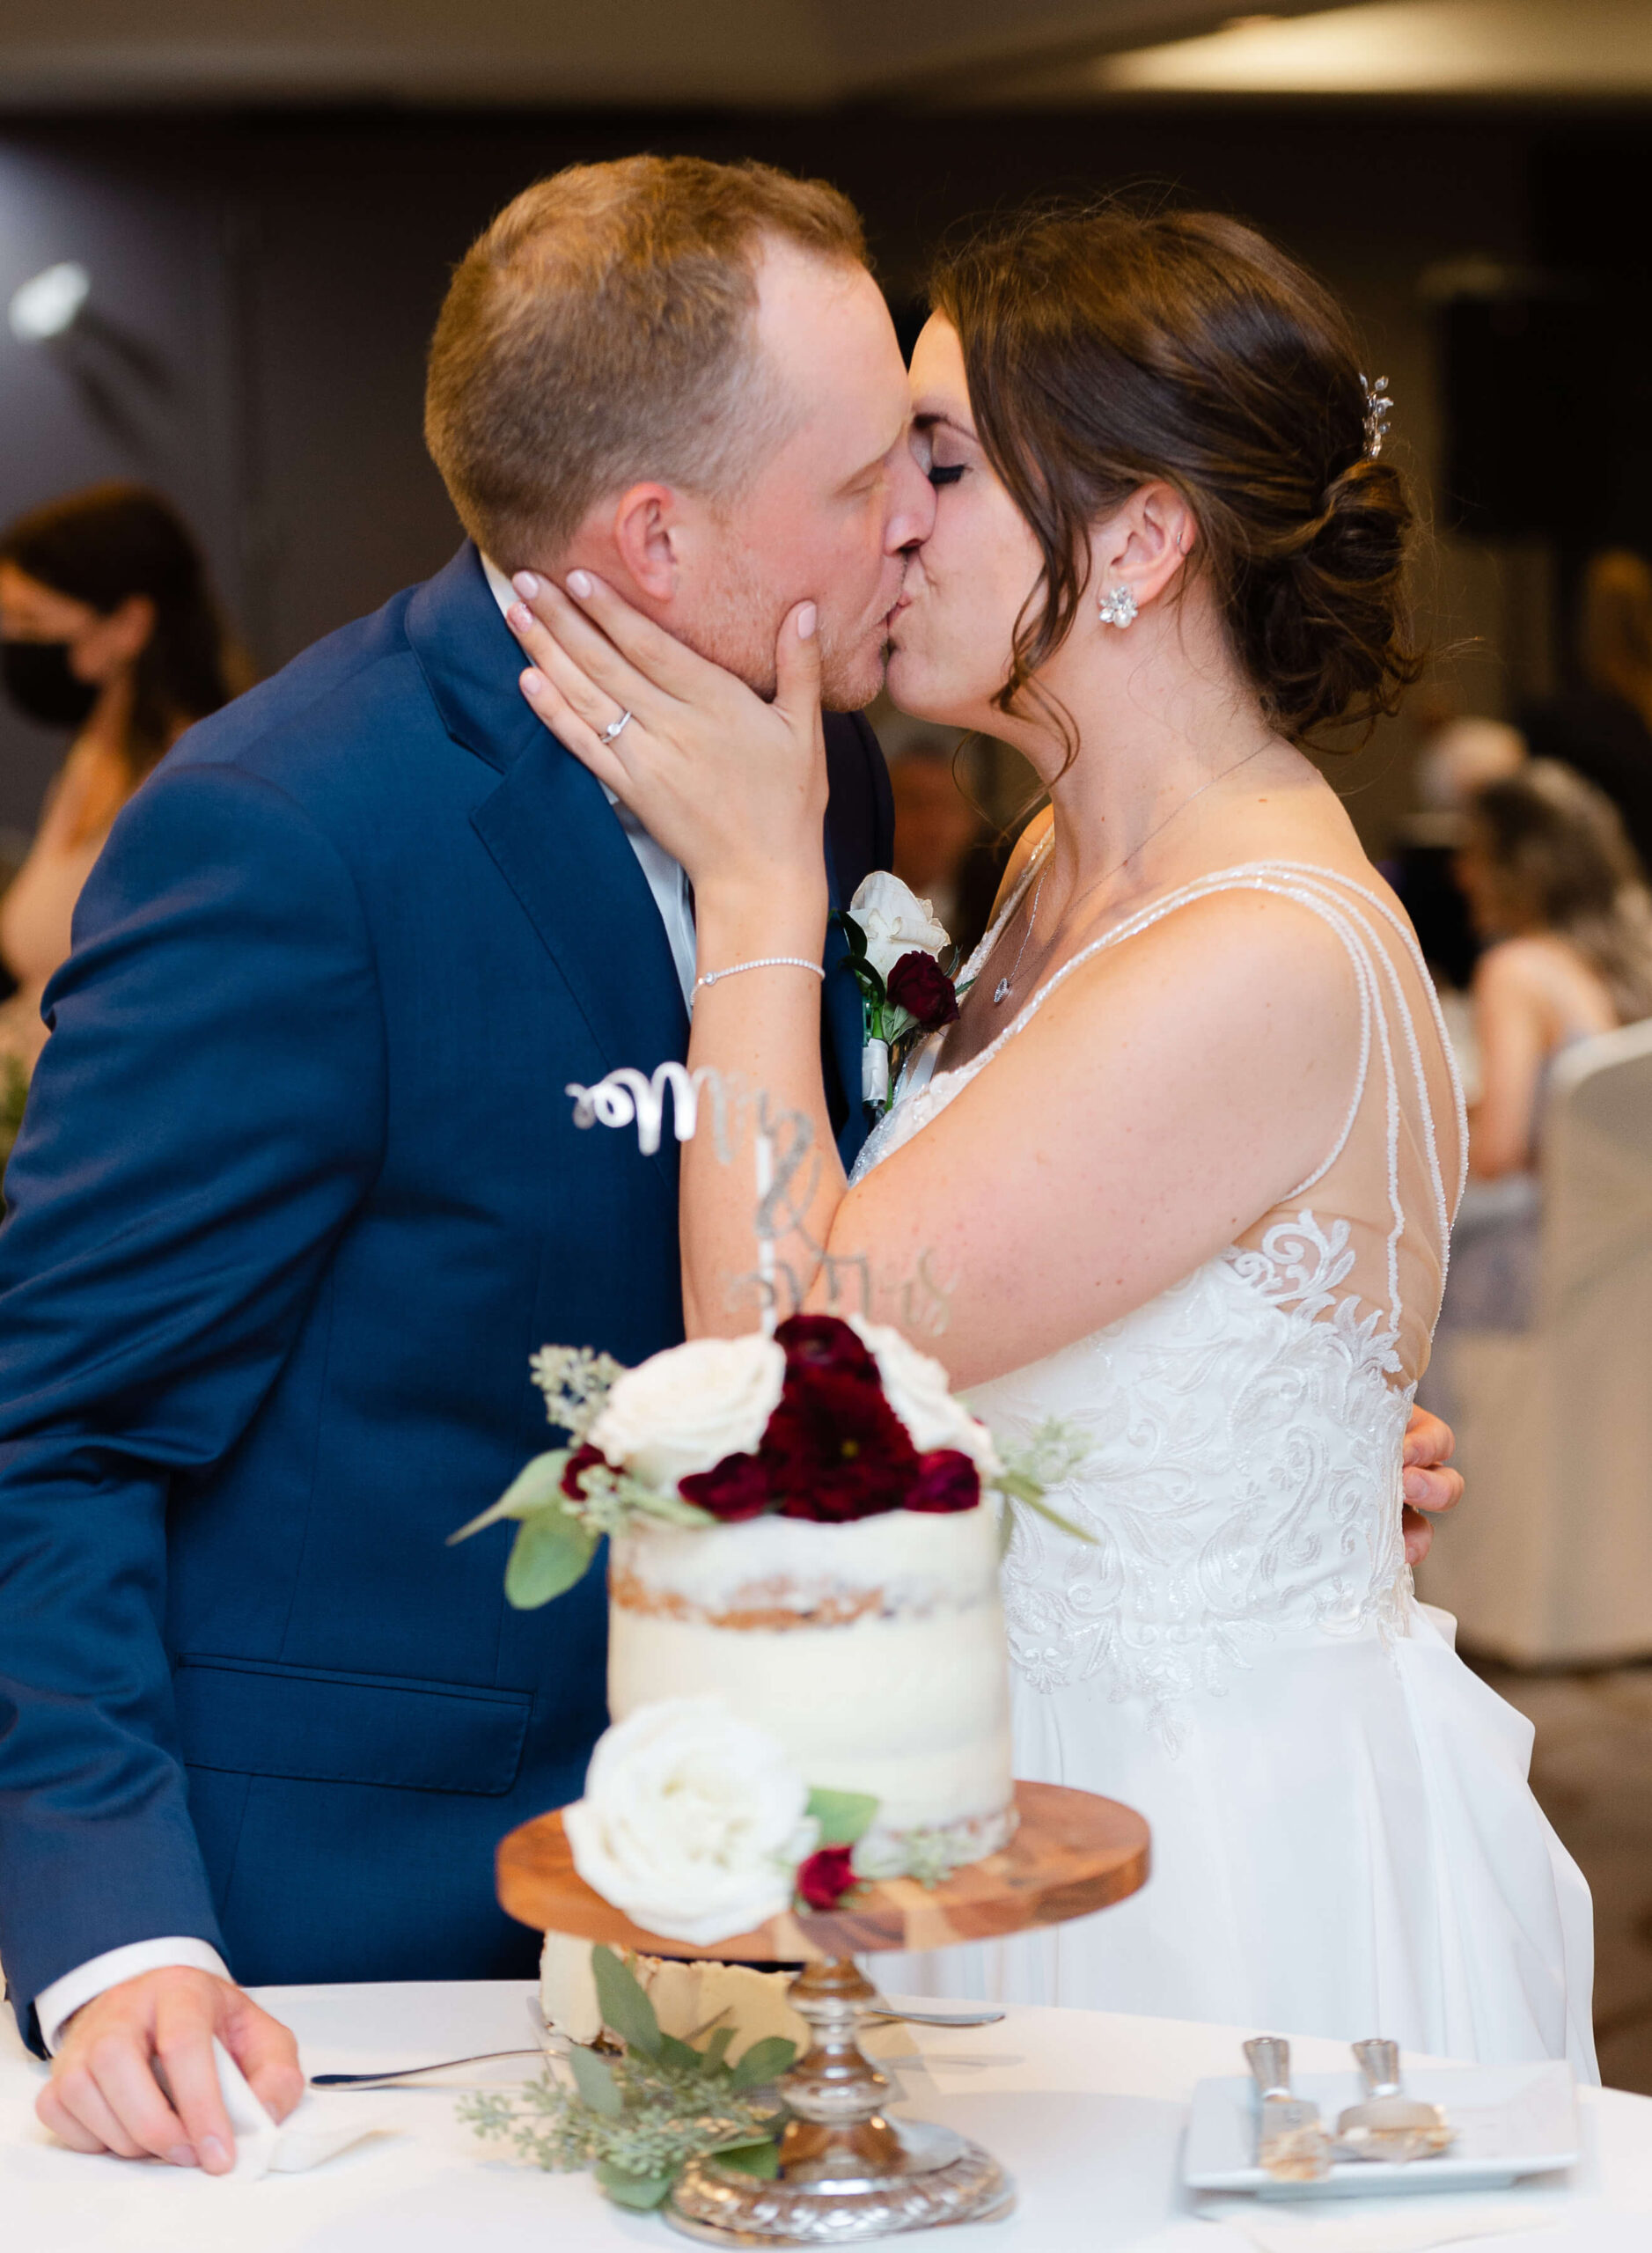 bride and groom kissing as they cut their cake at their wedding organized by Opportunity Knocks Events